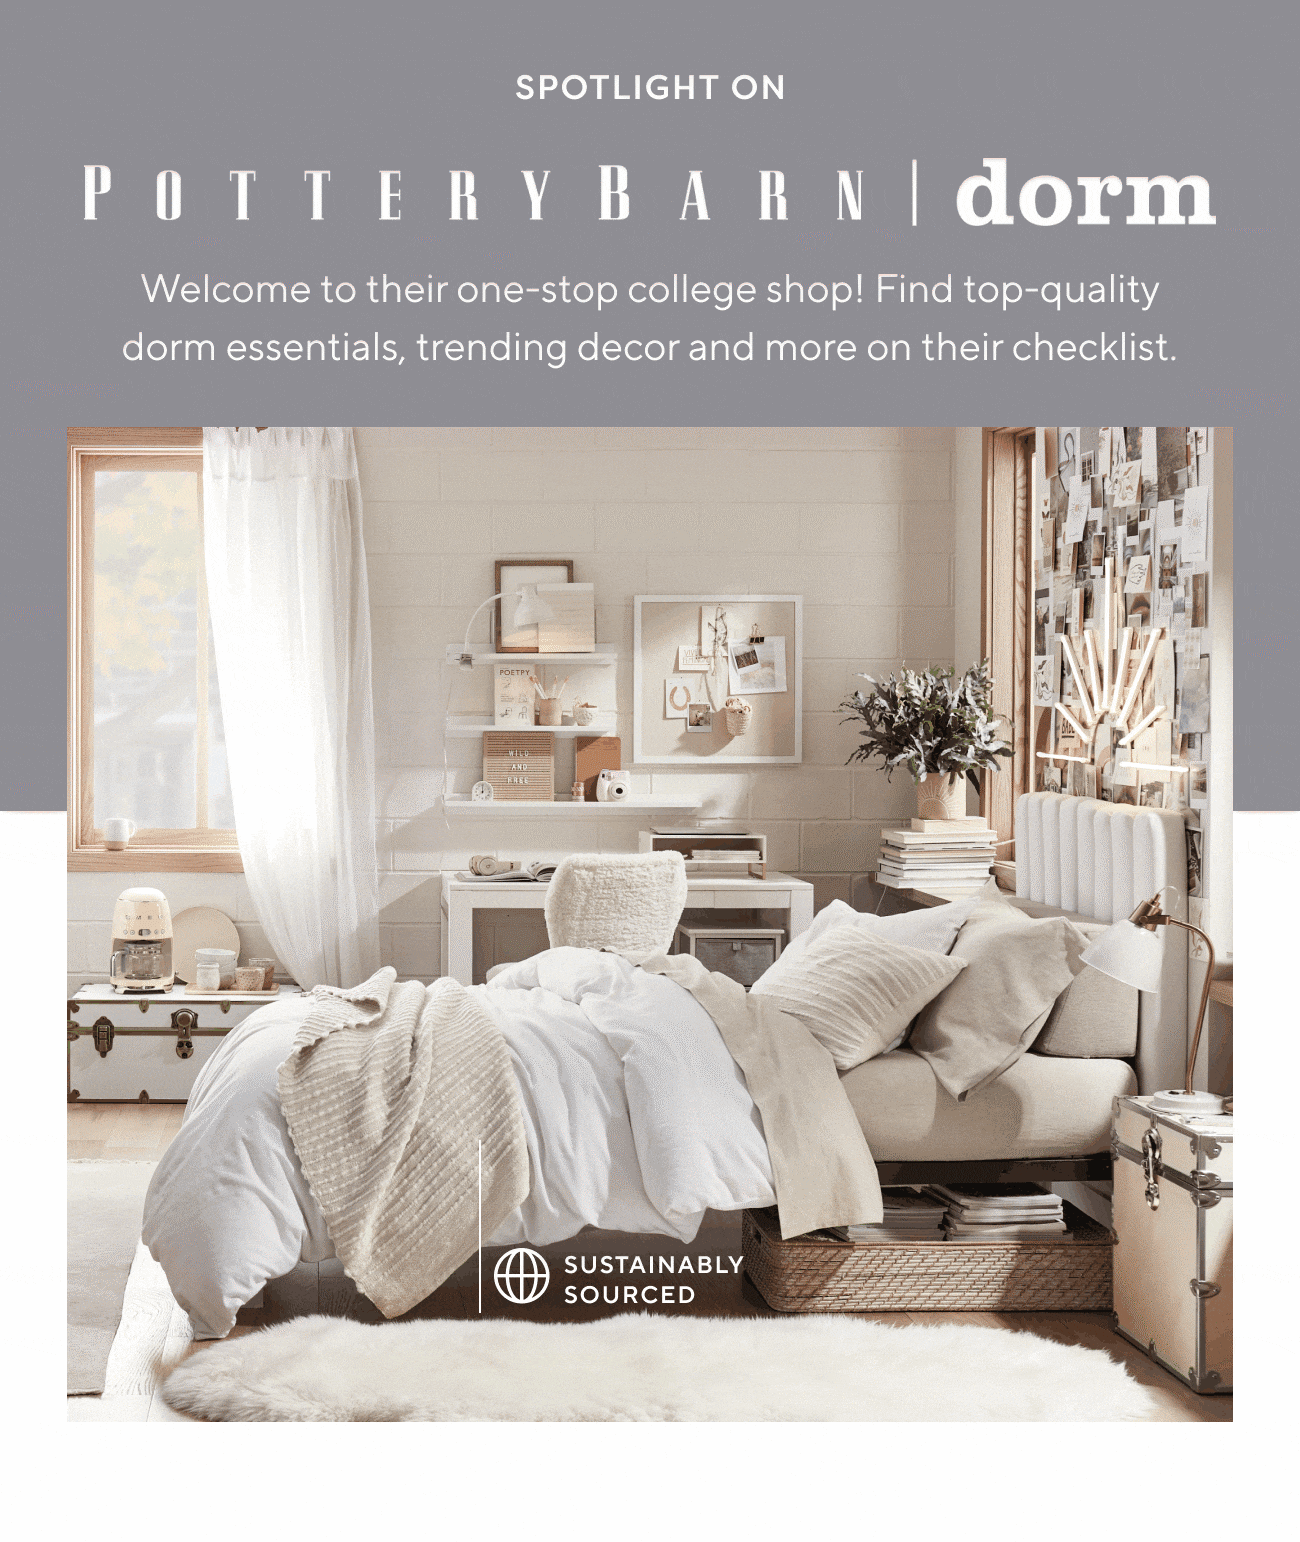 Introducing Pottery Barn Dorm: the one-stop college shop - Pottery Barn ...